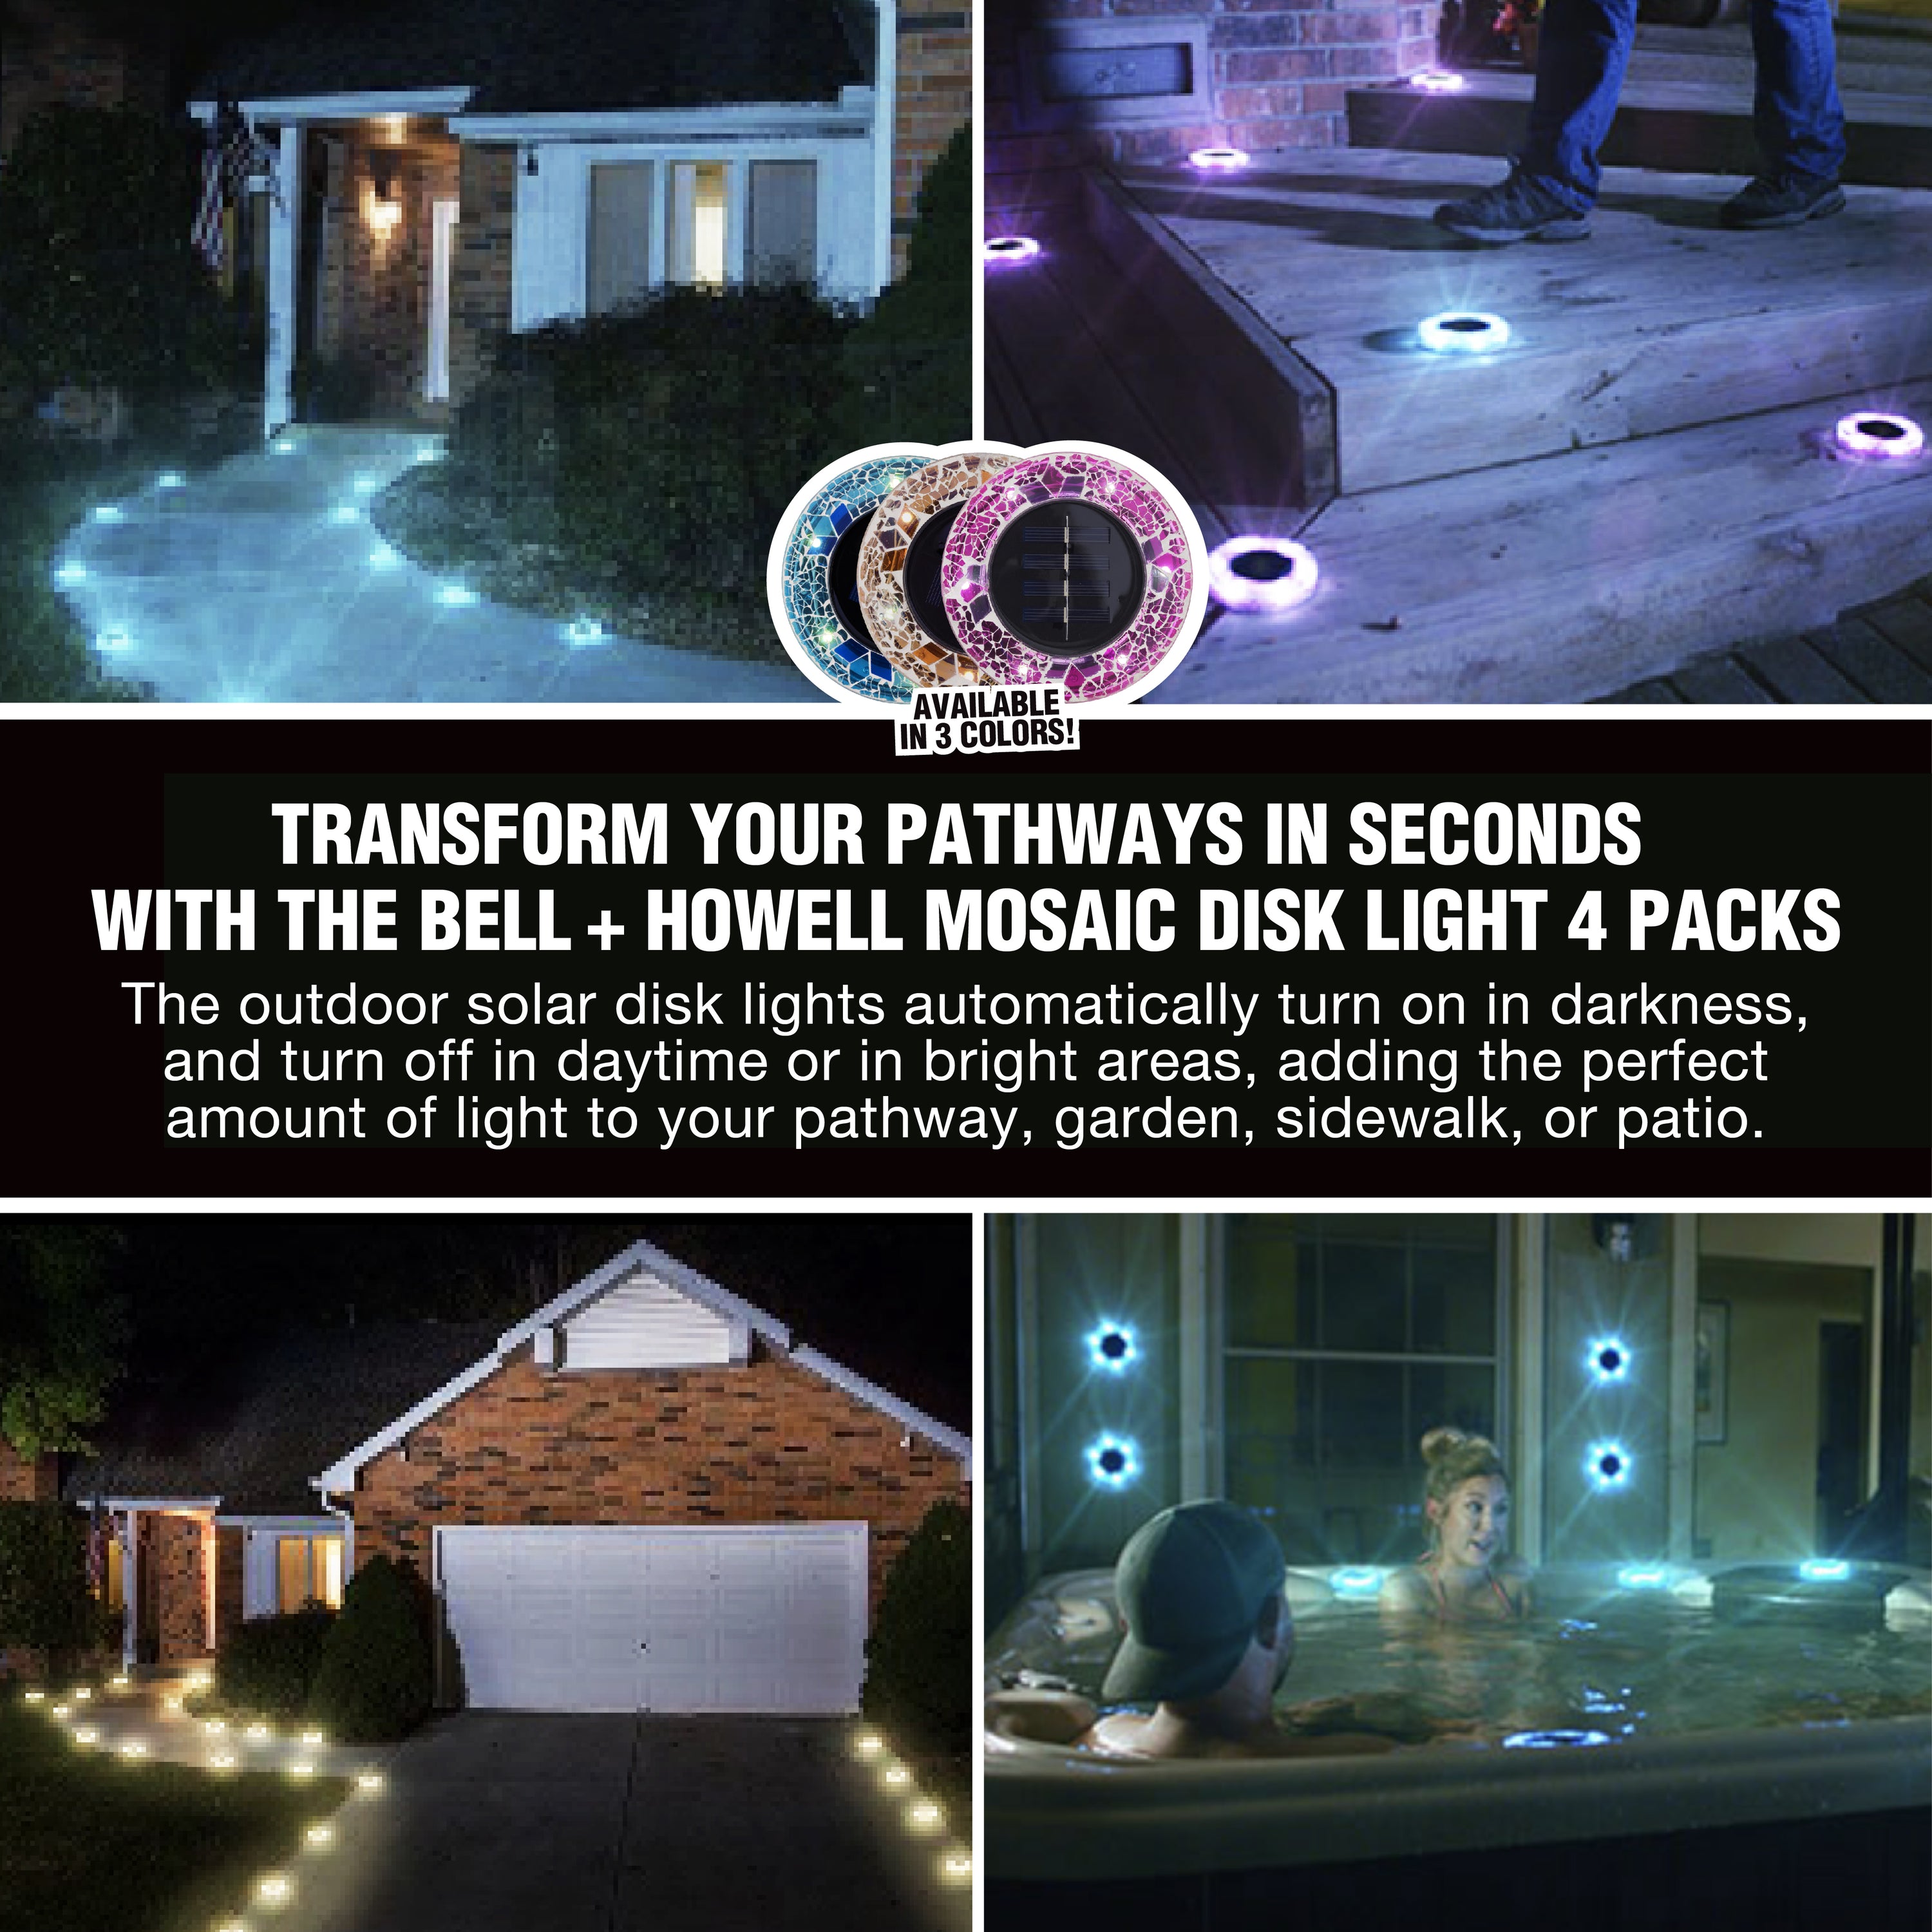 Bell + Howell Pathway & Landscape Mosaic Disk Light 4 Pack